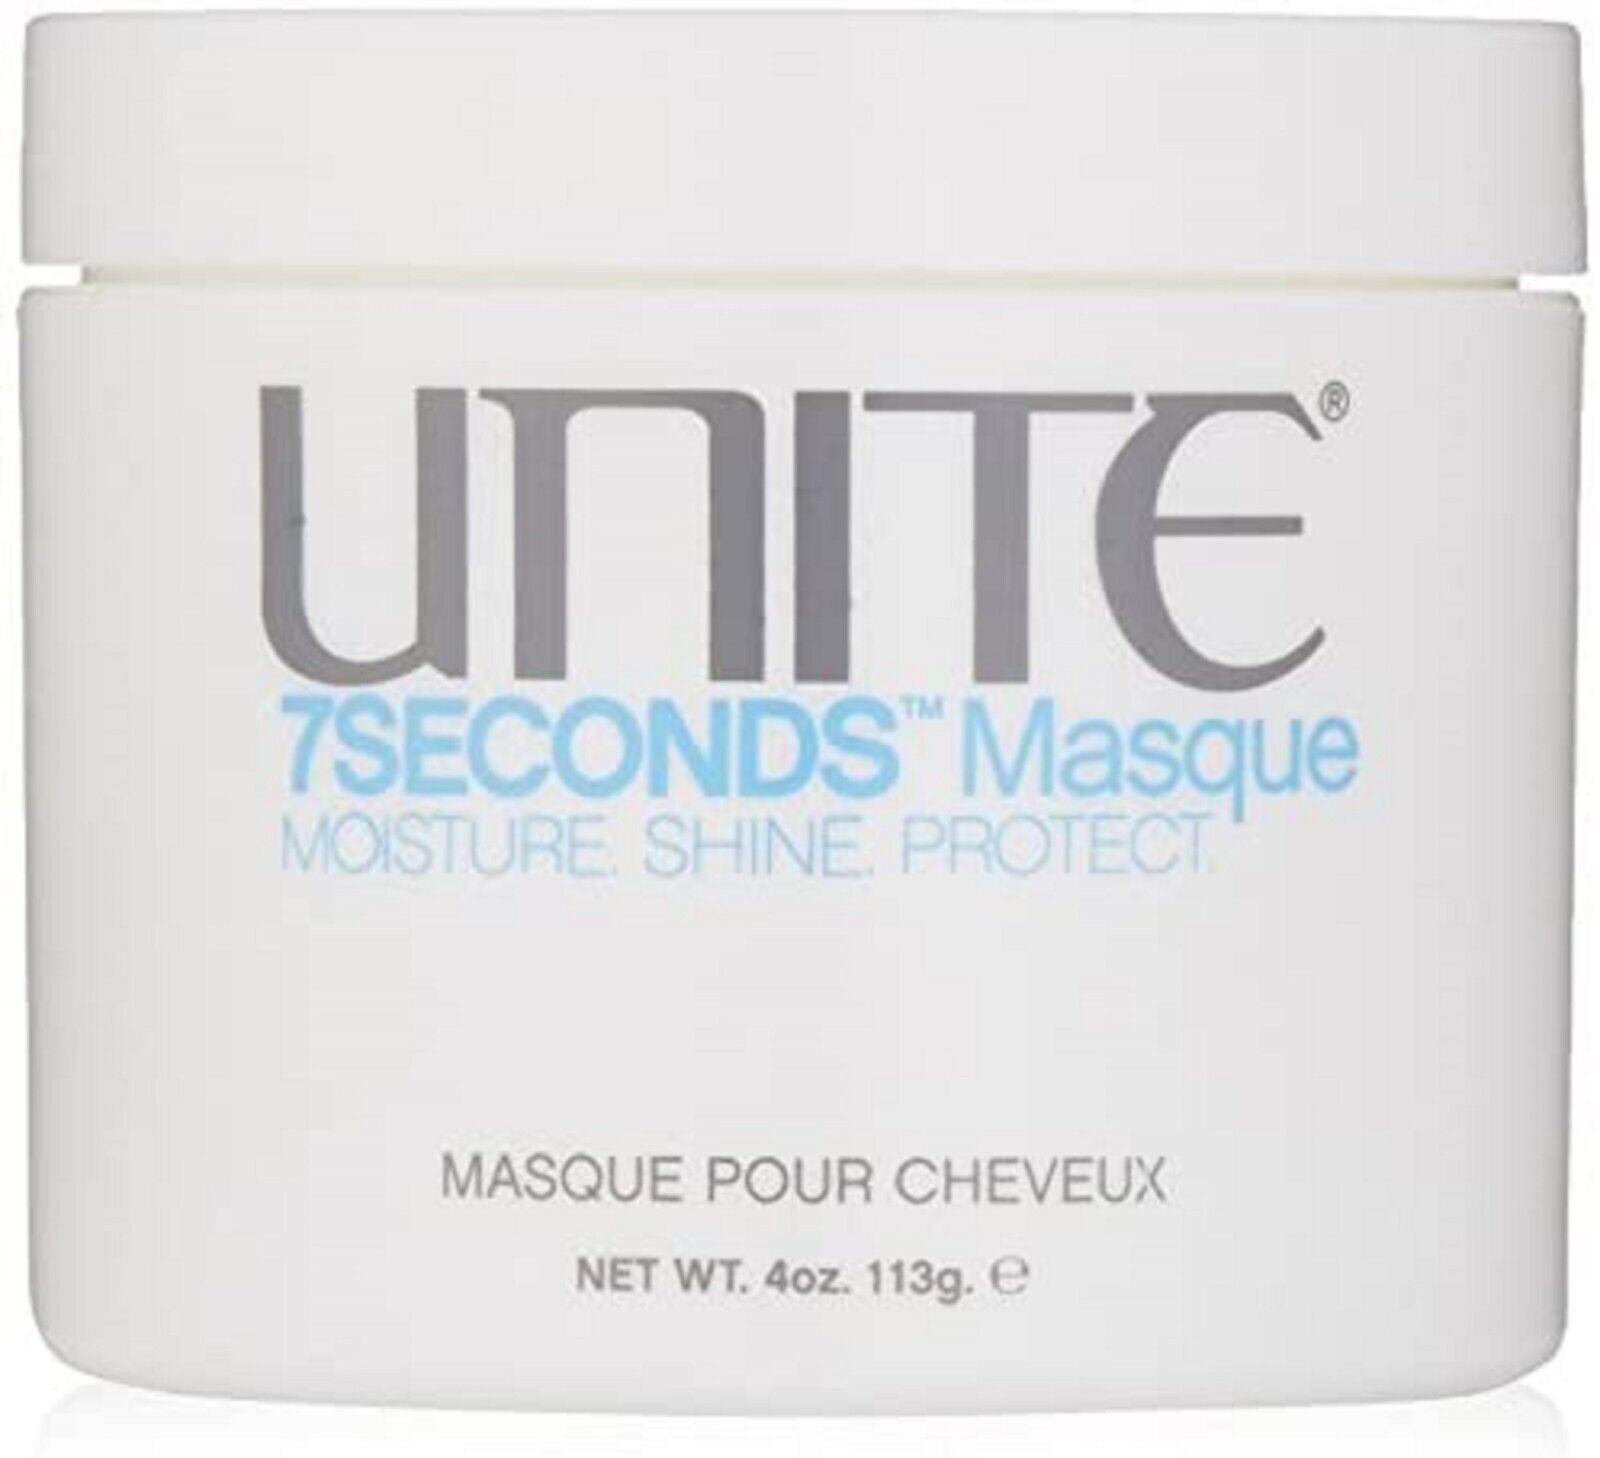 UNITE Hair 7 Seconds Mask Masque ~  4 oz/ 113 g ~  BRAND NEW!!! Free Shipping!!